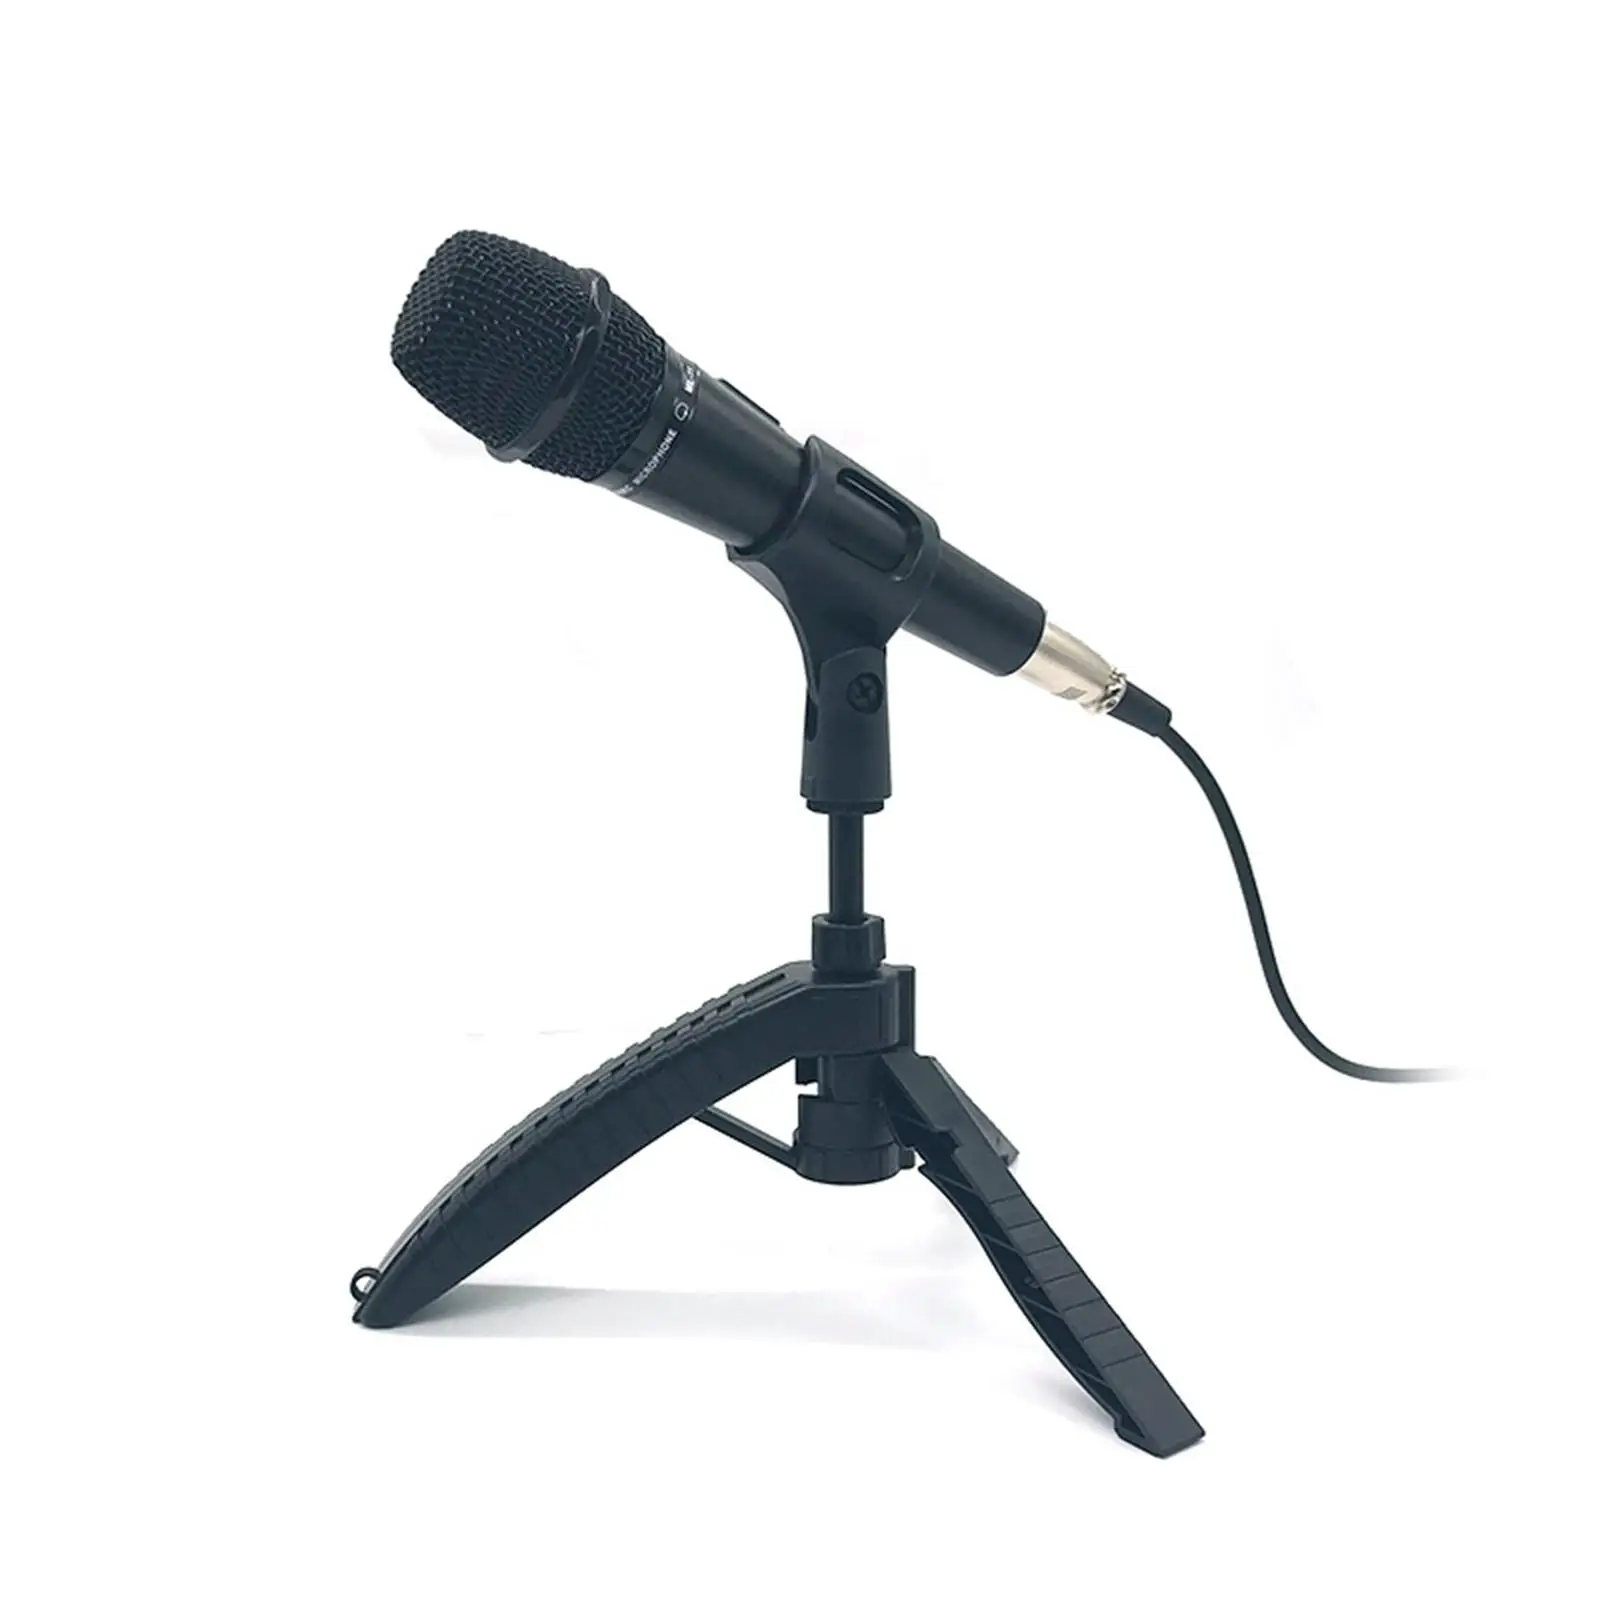 Foldable Microphone Tripod Heavy Duty Portable Tabletop Mic Stand Holder for Broadcasting Conferences Screencasts Lectures Home